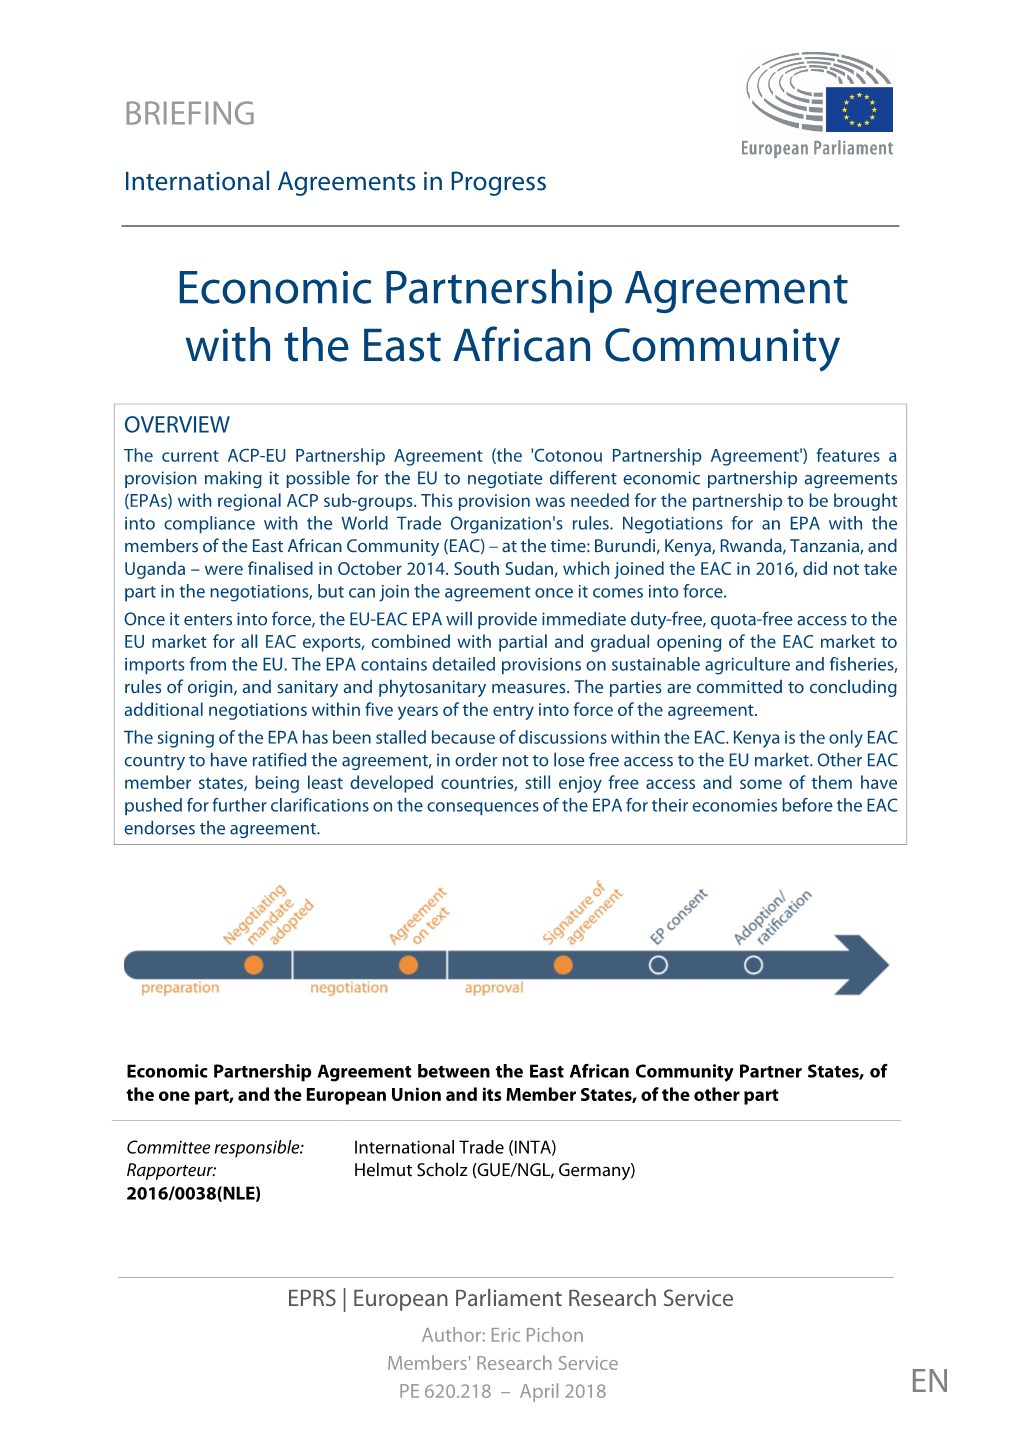 Economic Partnership Agreement with the East African Community